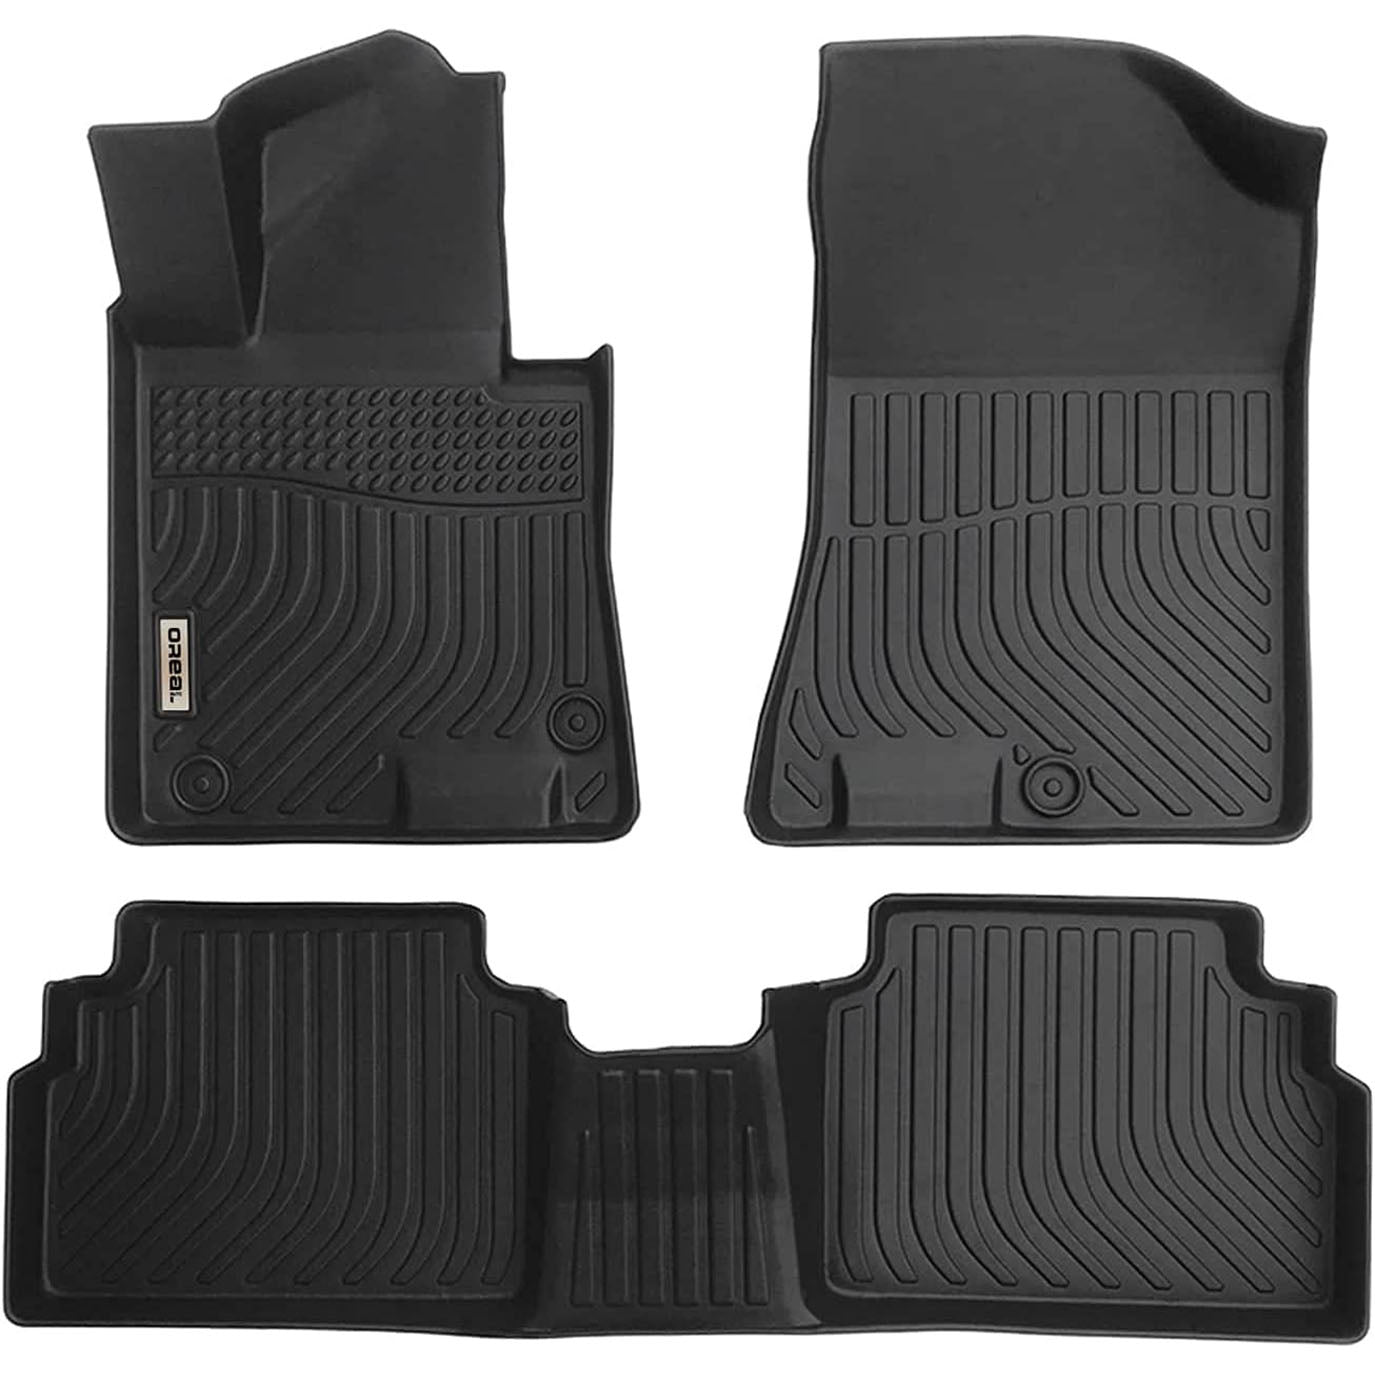 Kia K5 FWD 2020- (Only Fit Front Wheel Drive, Not Fit AWD) Black Floor Mats TPE